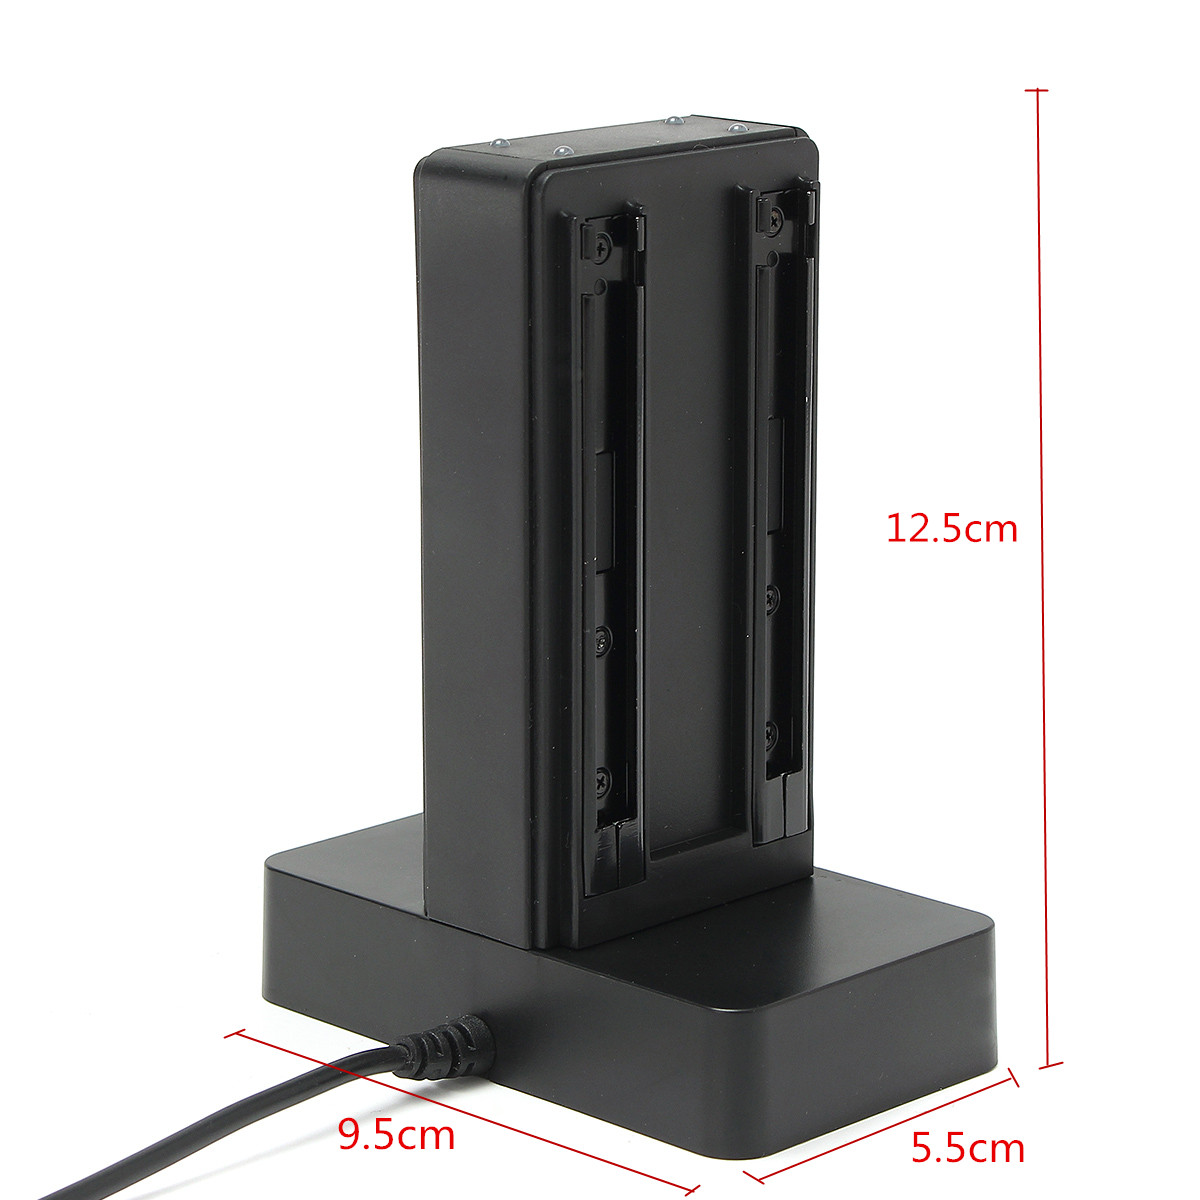 Charging Dock Station Charger Stand For Nintendo Switch 4 Joy-Con Controller 59